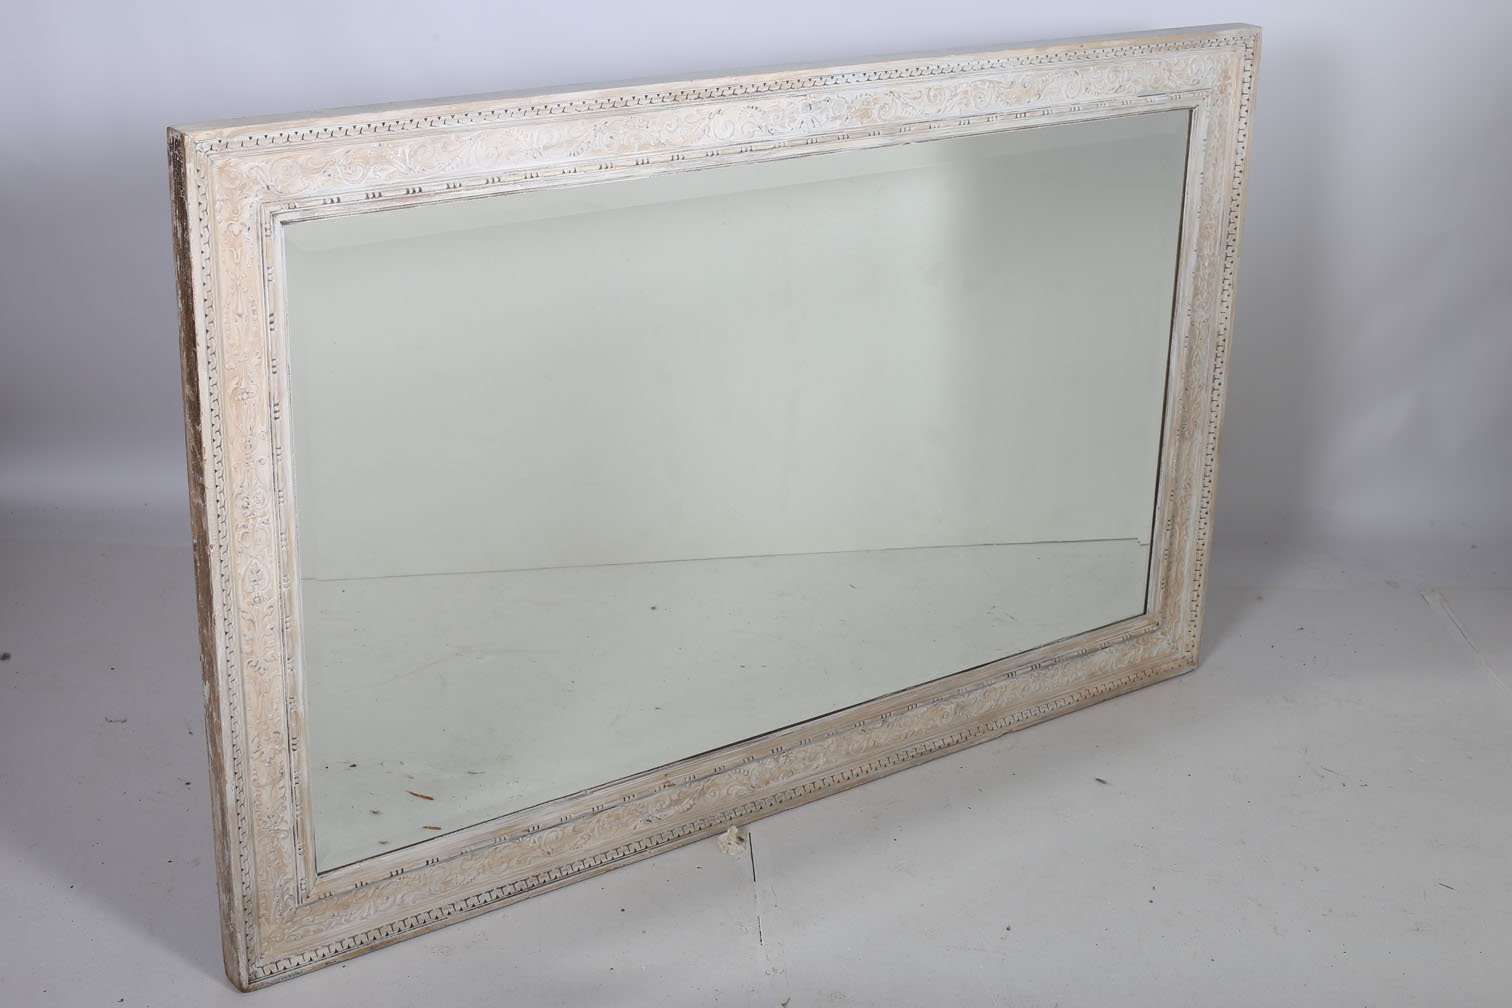 A CONTINENTAL CREAM PAINTED MIRROR the rectangular bevelled glass plate within a C-scroll flowerhead